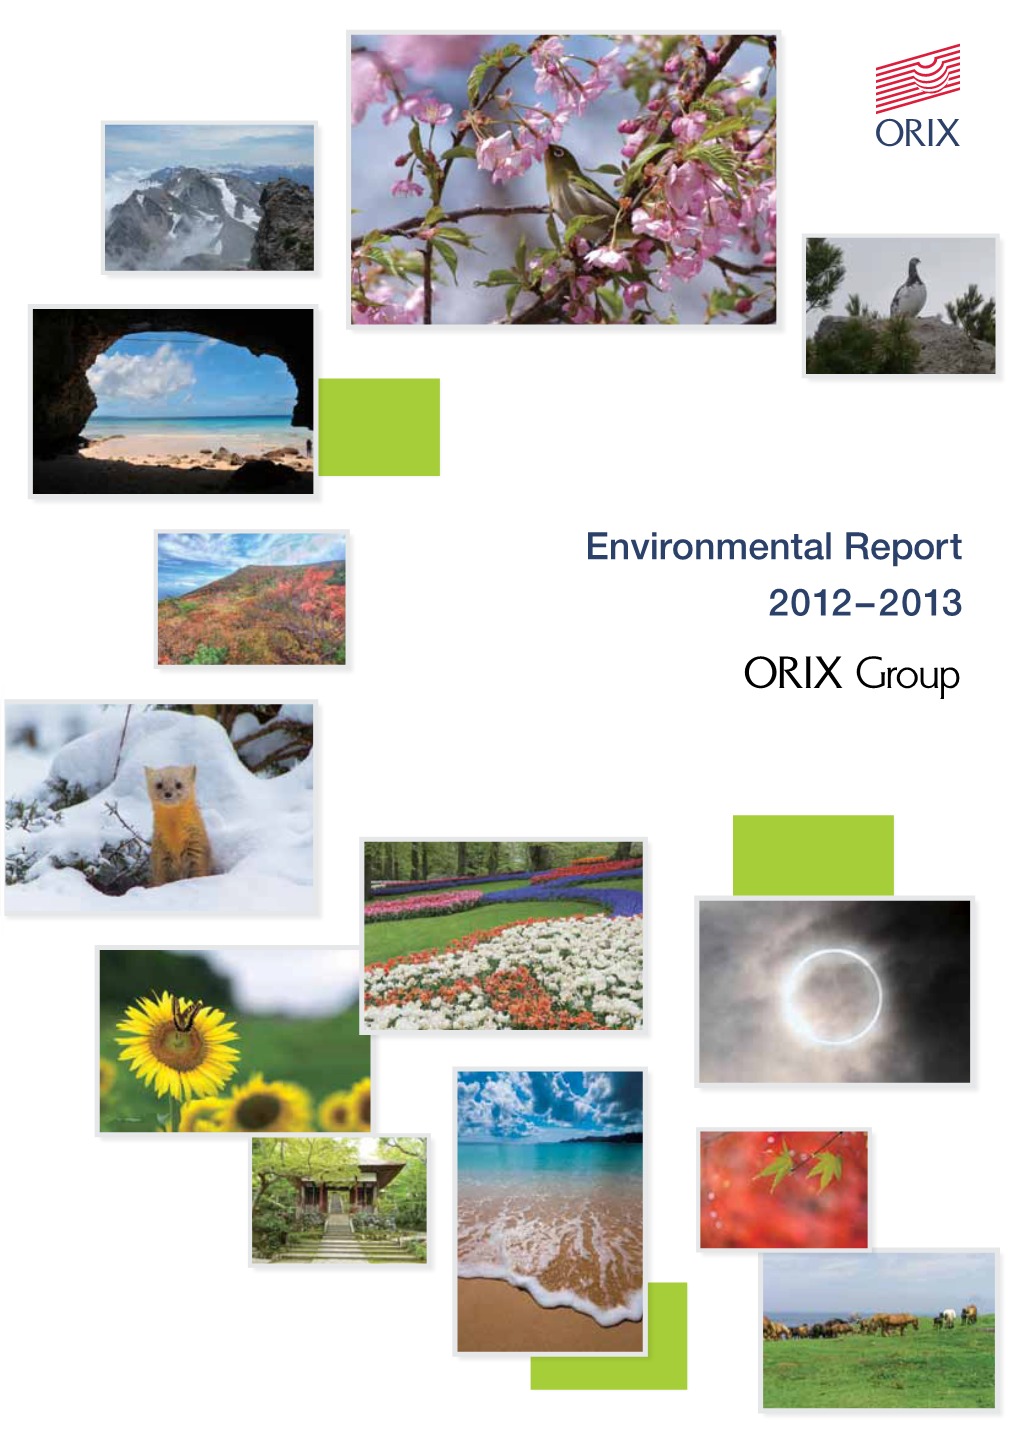 Environmental Report 2012–2013” Has Been Published to Familiarize Stakeholders with the Various Eco Services and Eco Activities of the 03 Dialogue ORIX Group